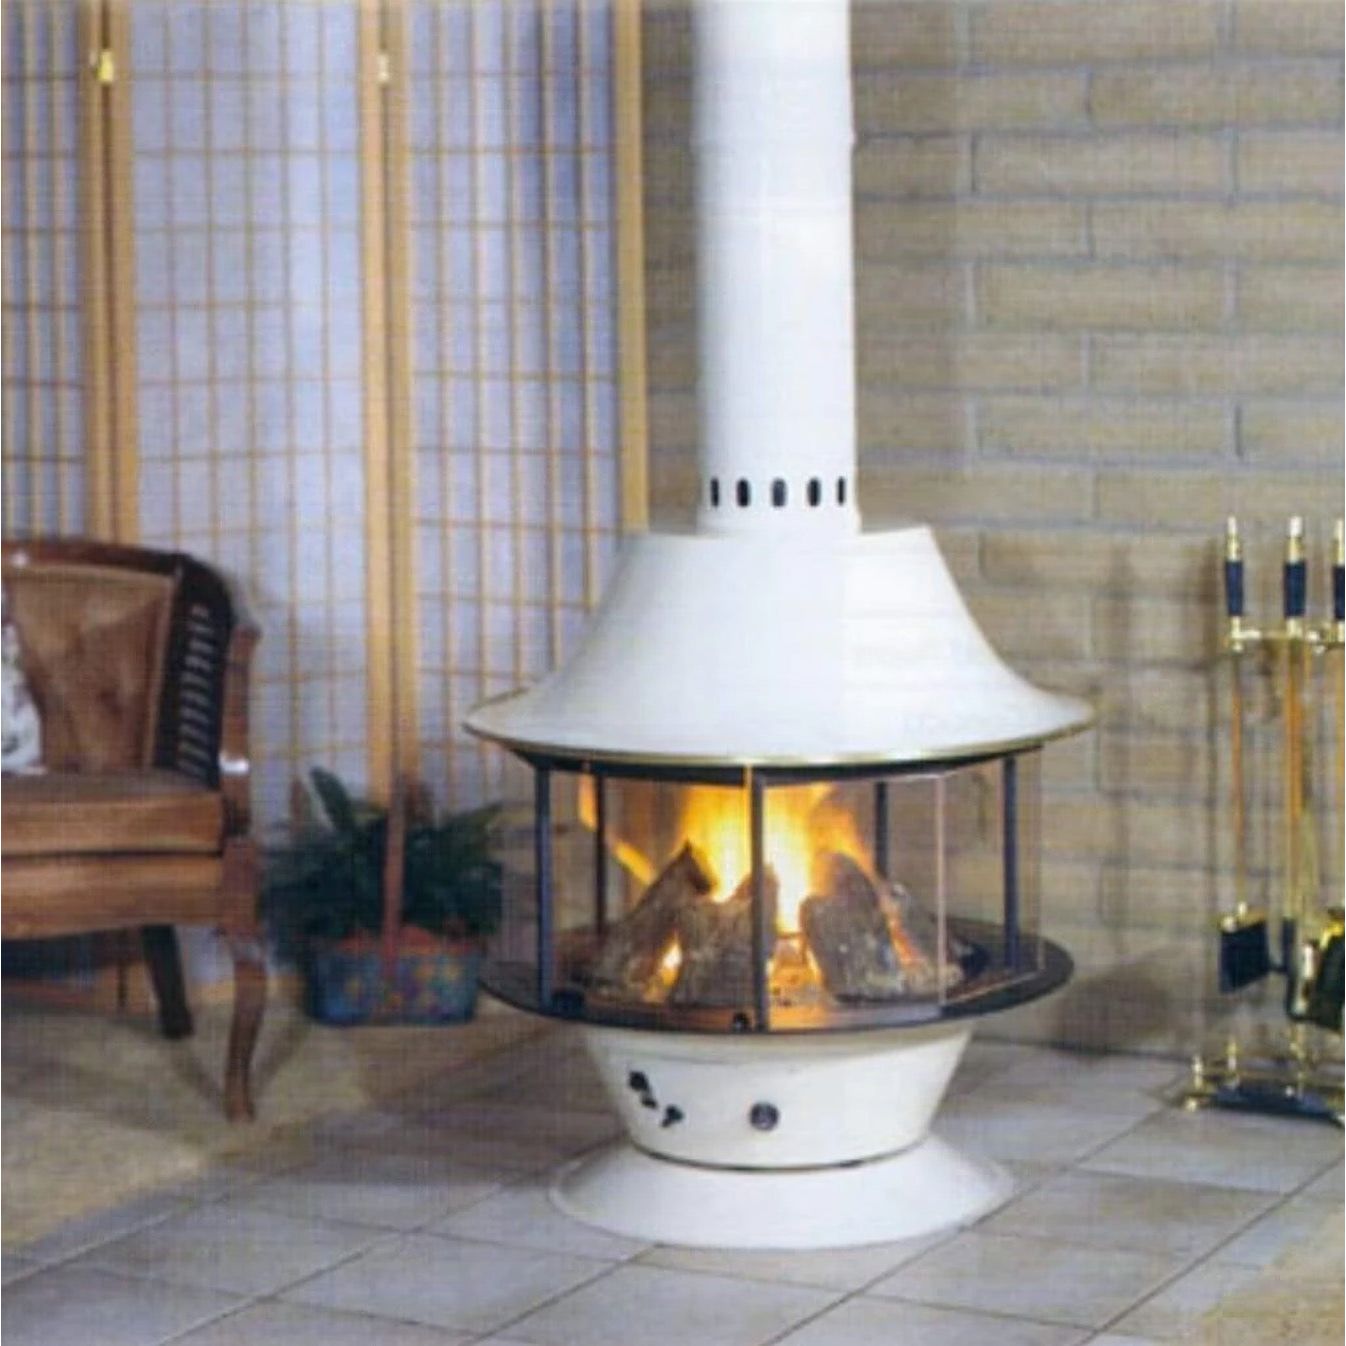 Malm 32" Spin-A-Fire Freestanding Wood Burning Fireplace with Porcelain Base